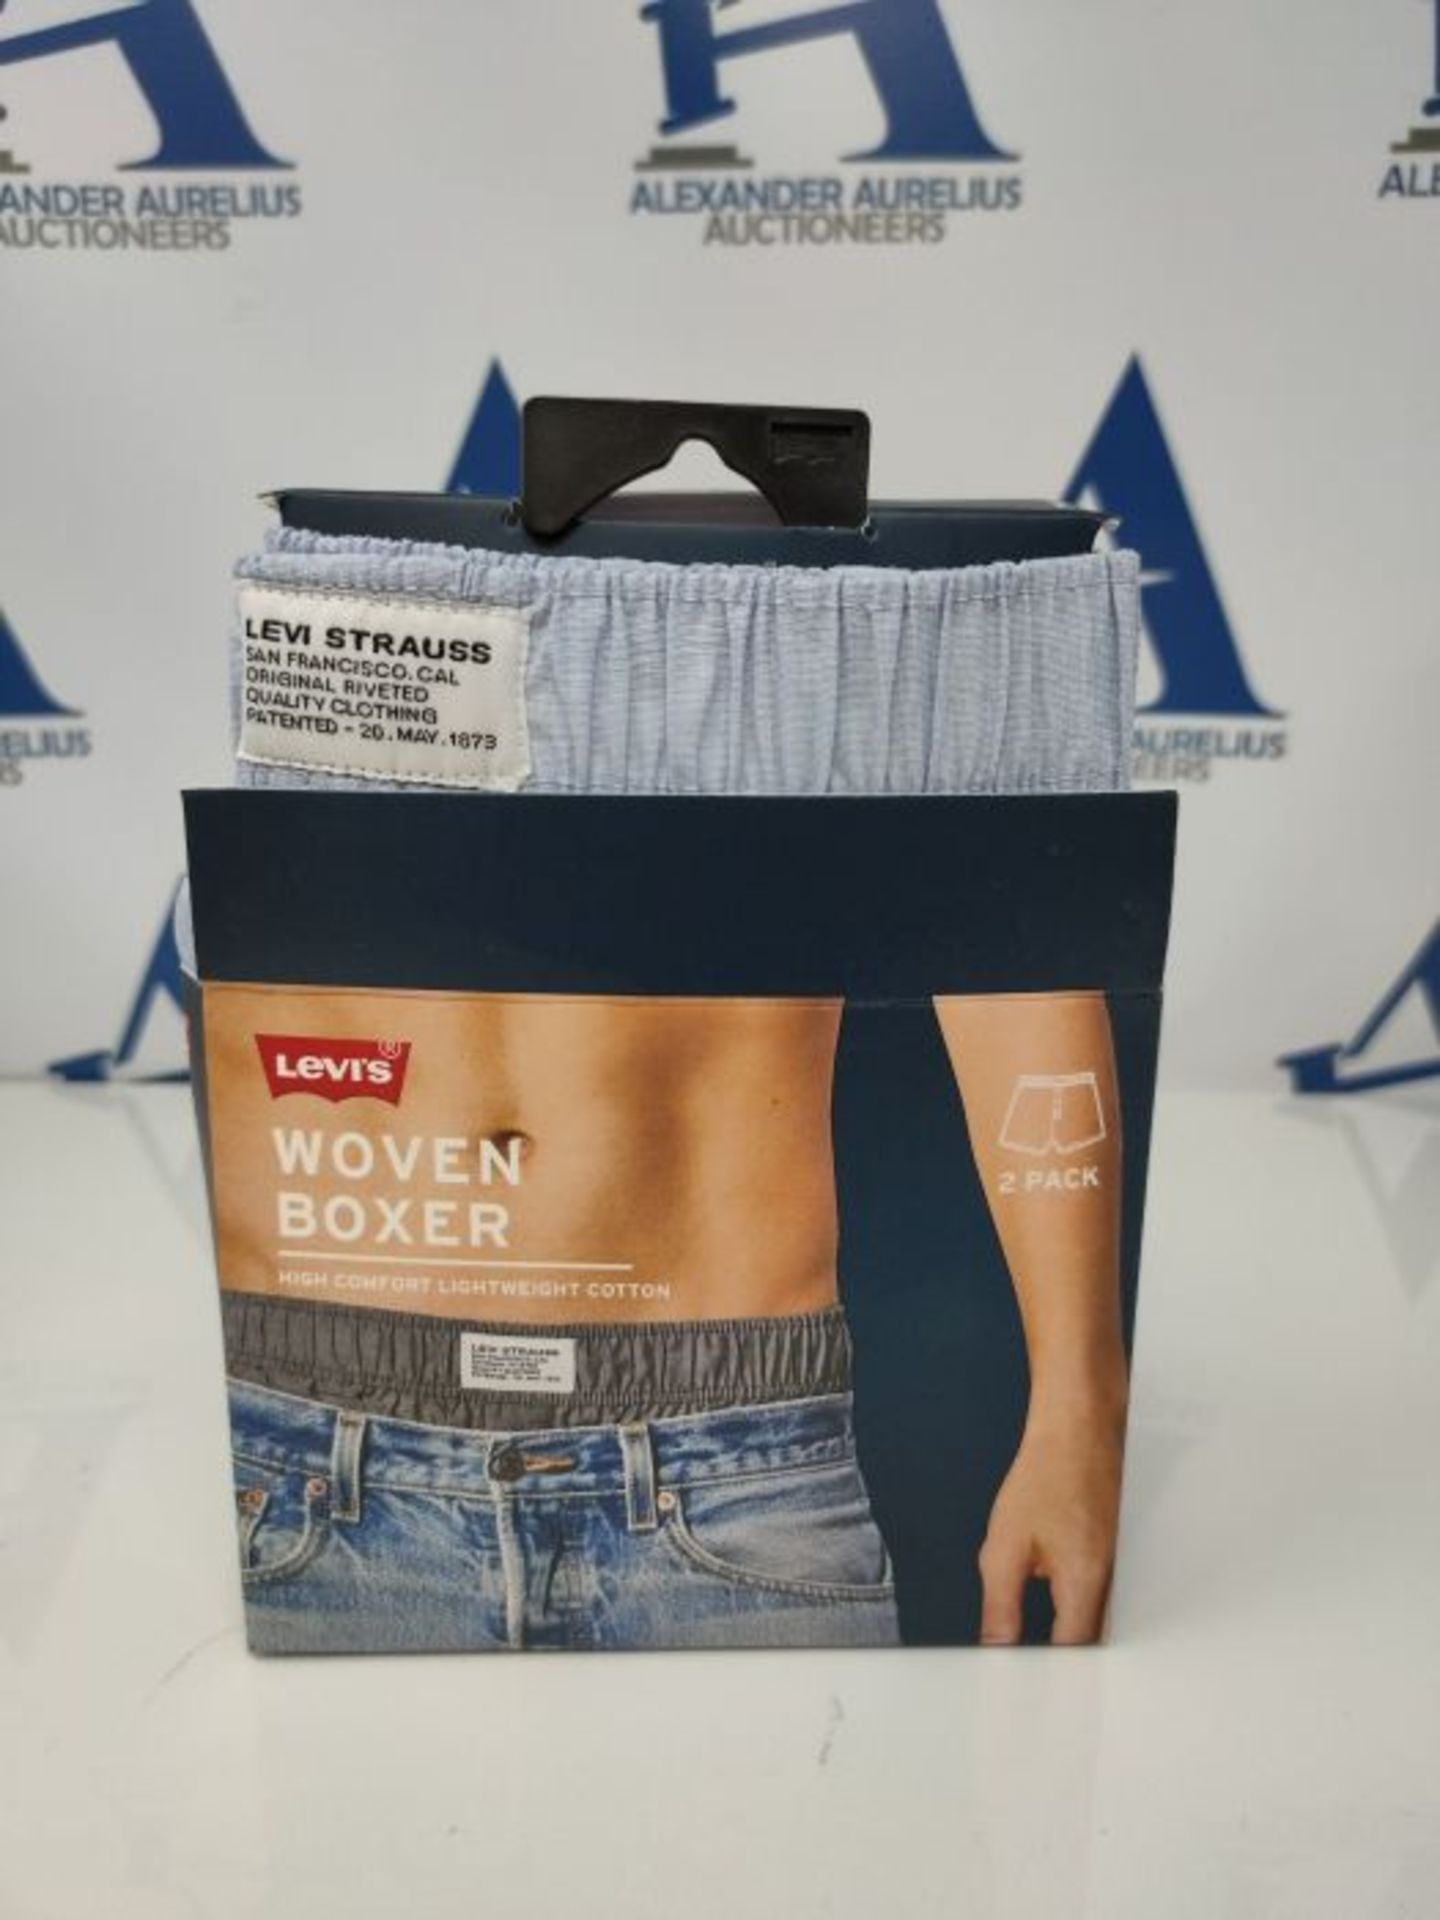 LEVIS Men's Woven Boxer Shorts, Light Blue, Small (Pack of 2) - Image 2 of 3